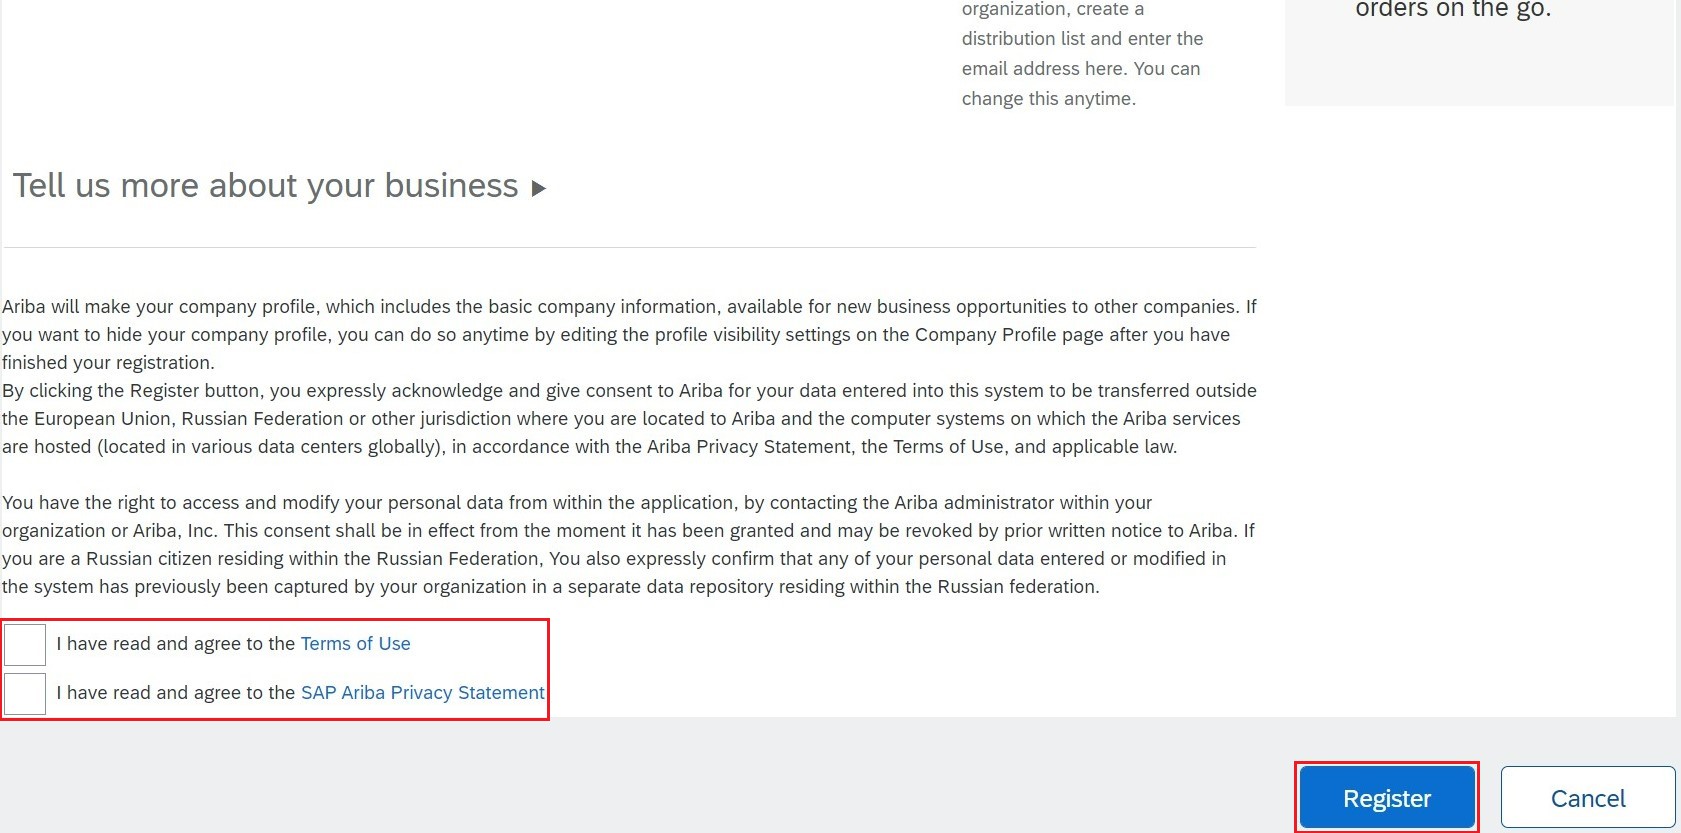 Alt text: A screenshot of the Terms of Use section on the SAP Ariba Registration page.